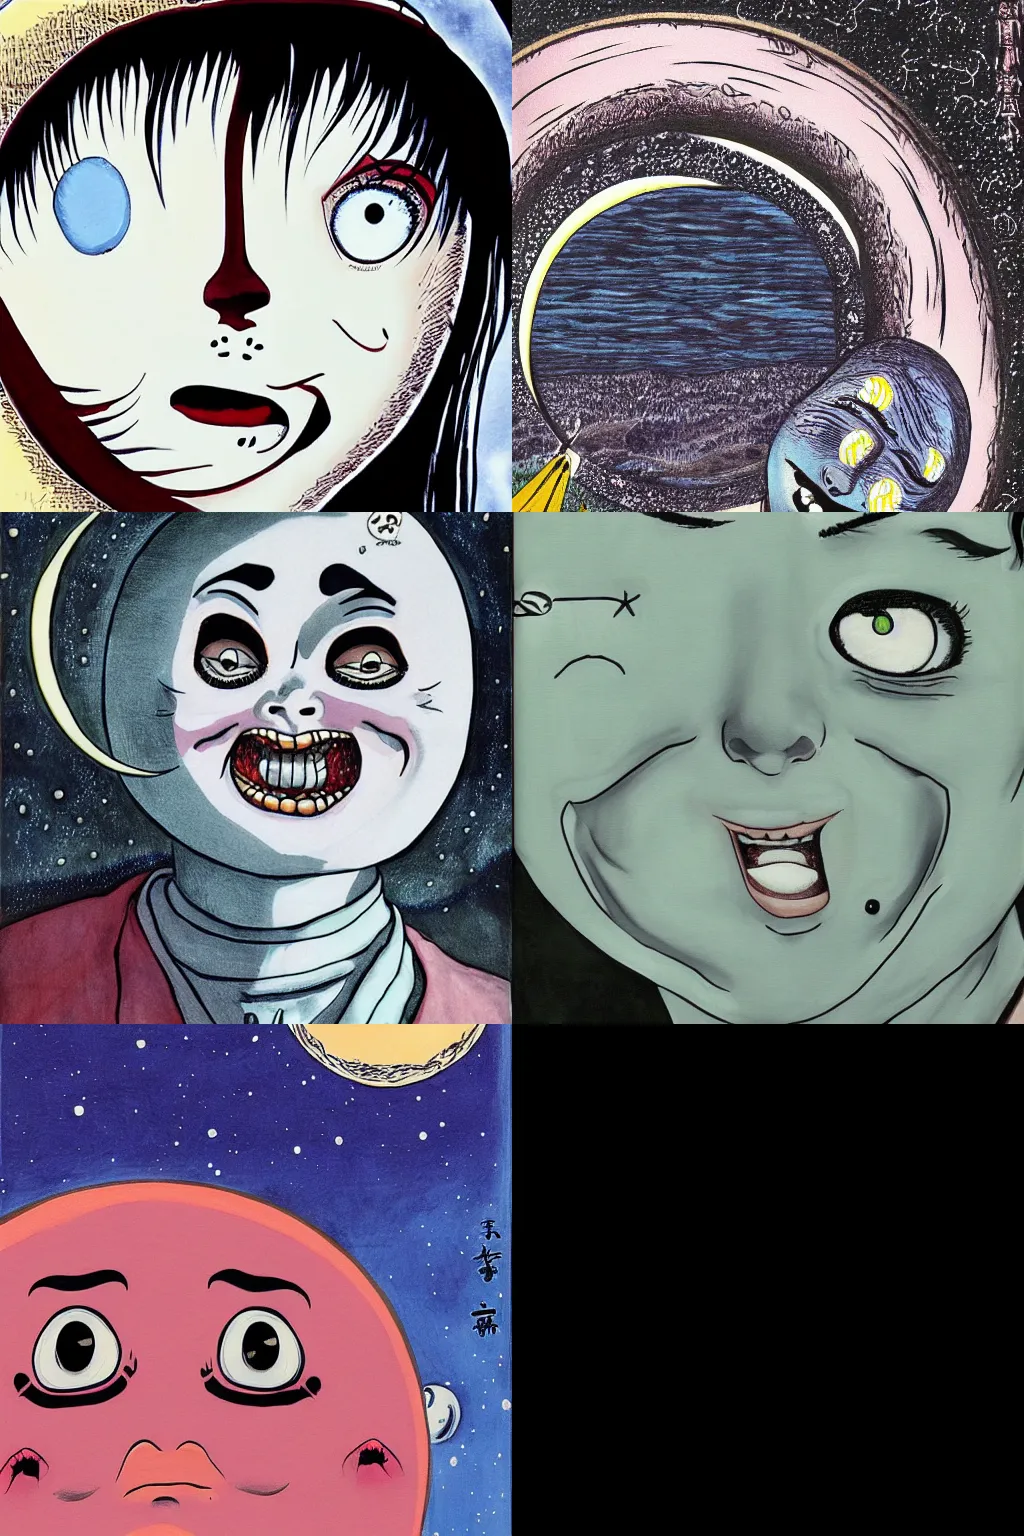 Prompt: The Moon smiling with a drool, painting by Junji Ito